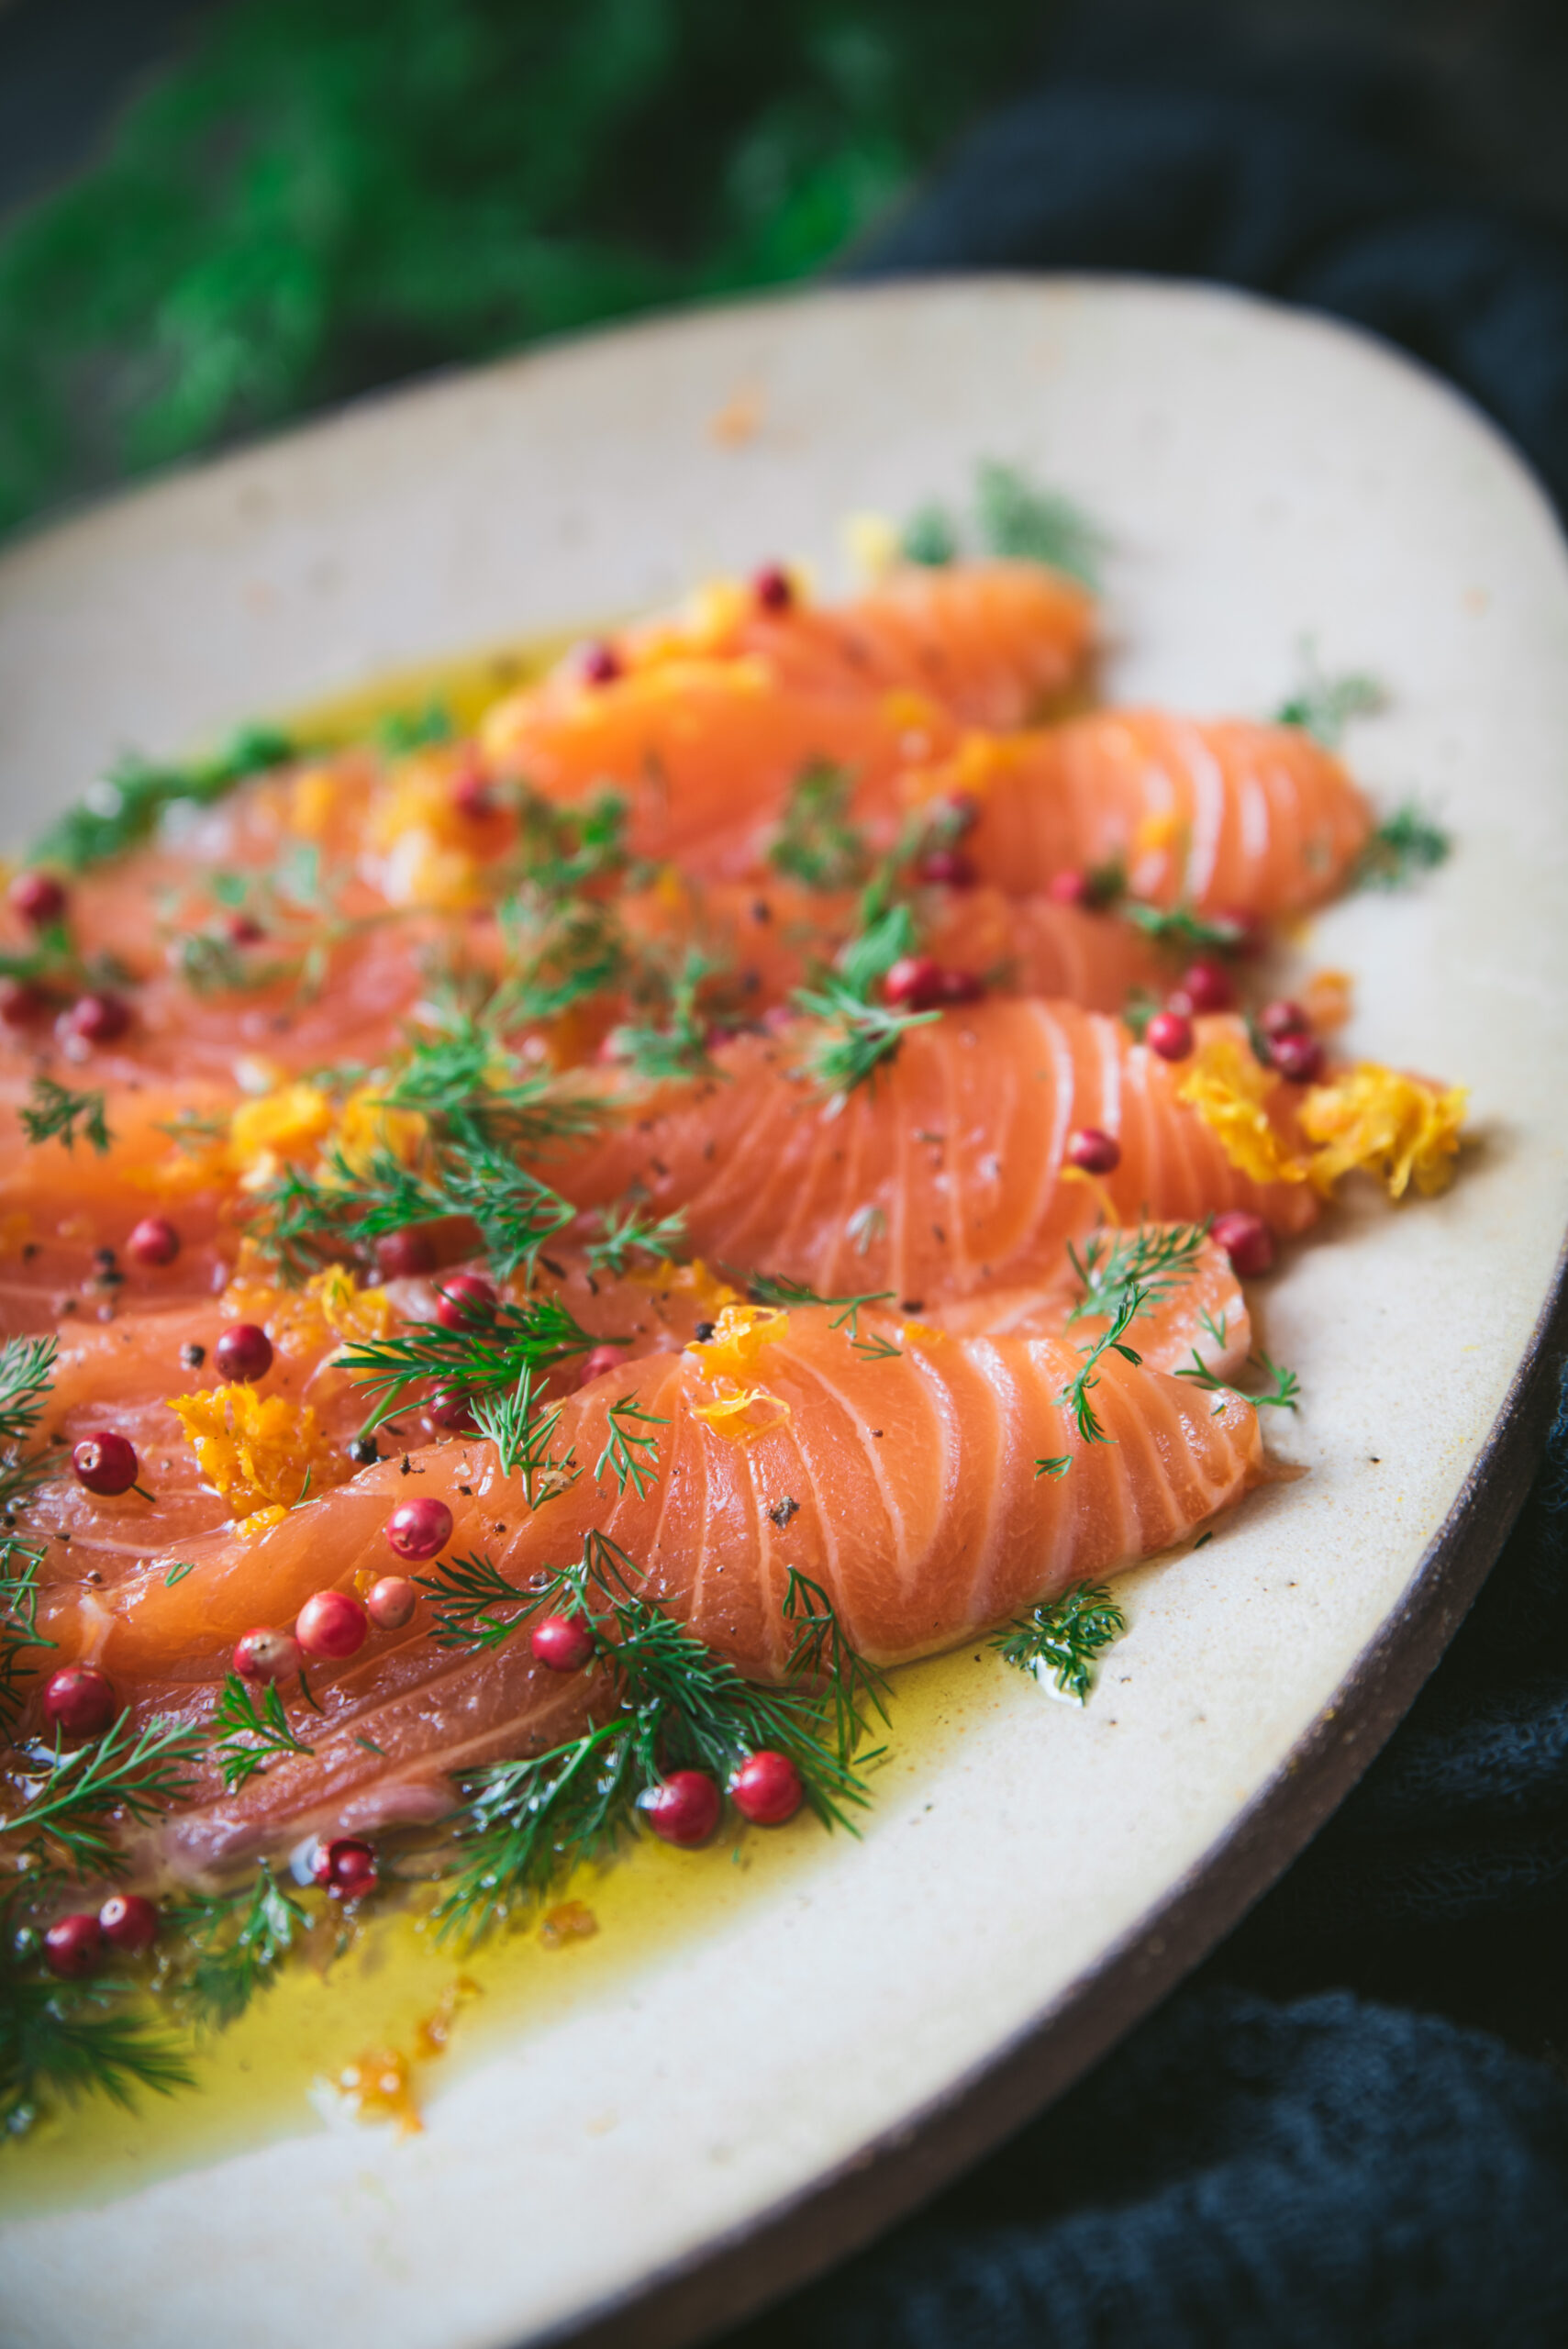 Sliced salmon marinated with dill recipe